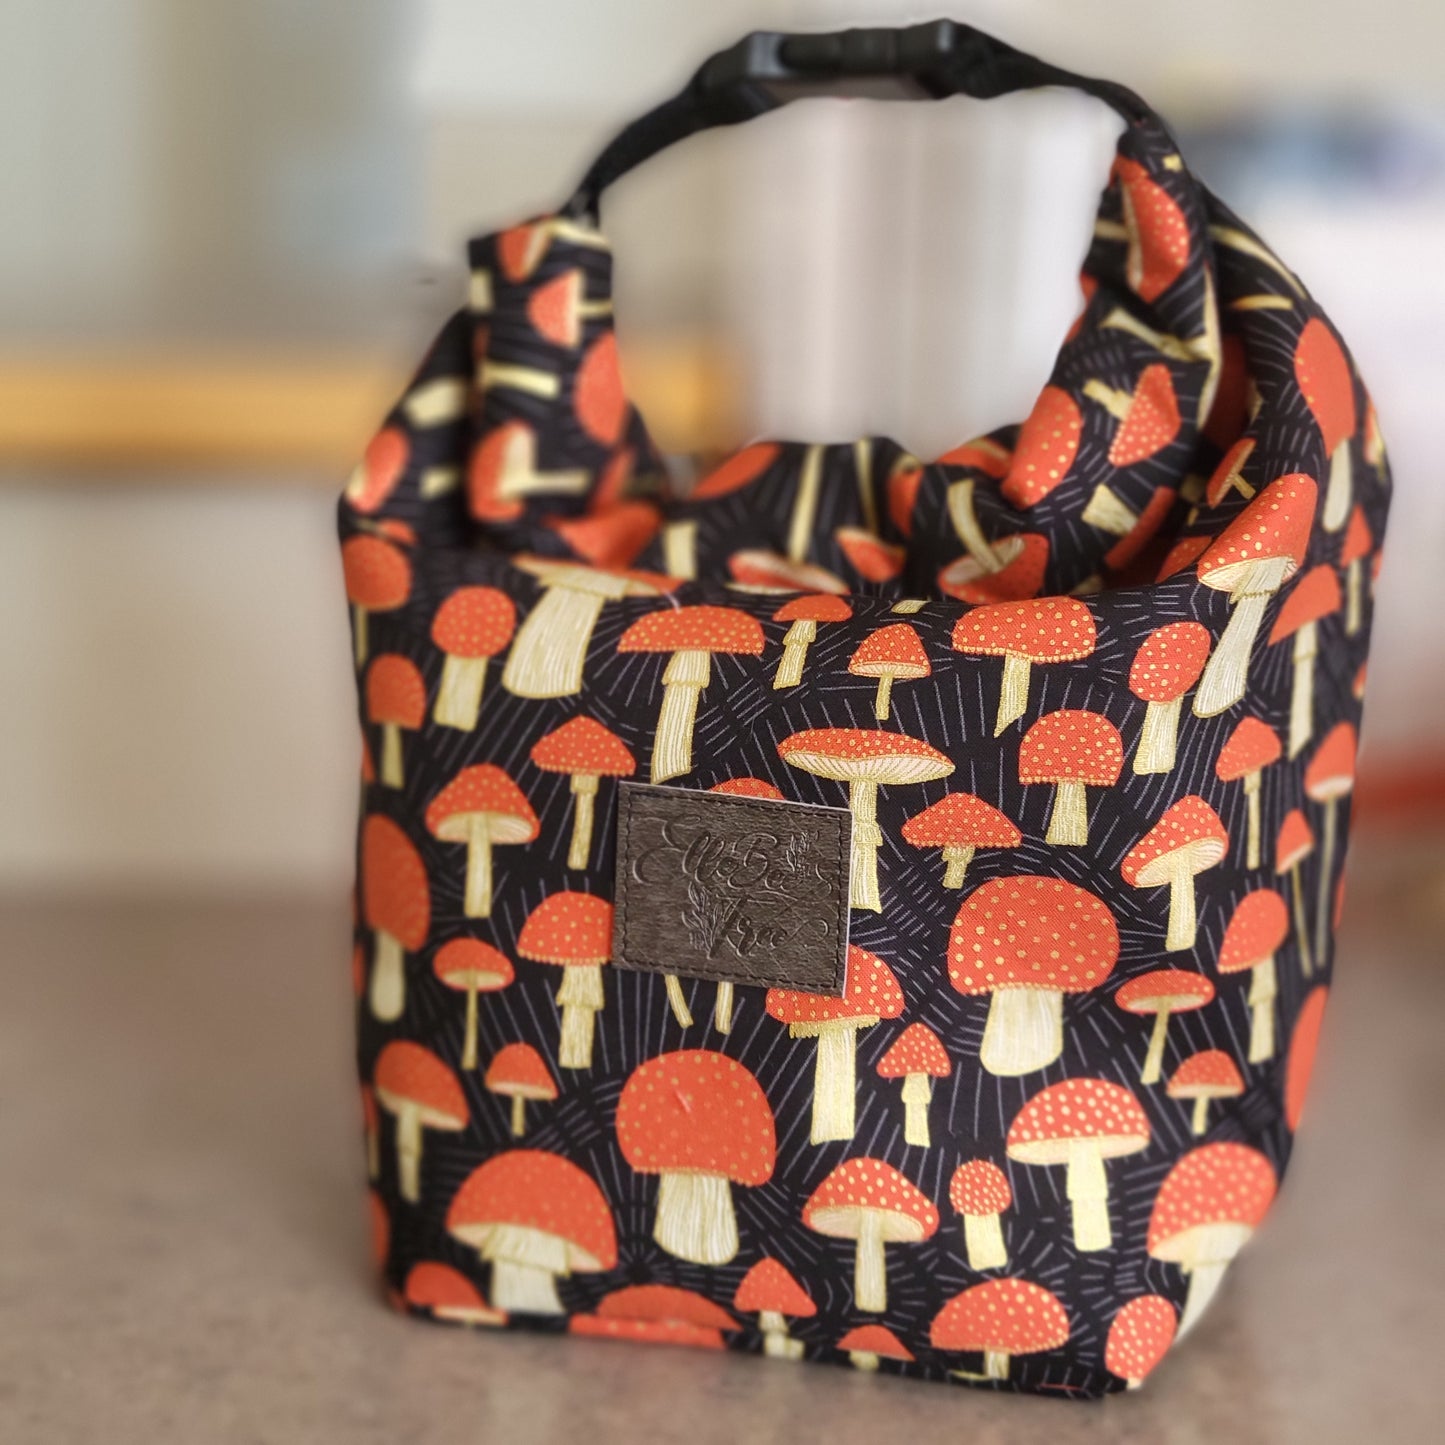 Nocturnal Mushrooms Insulated Snacky Sac Lunch Kit